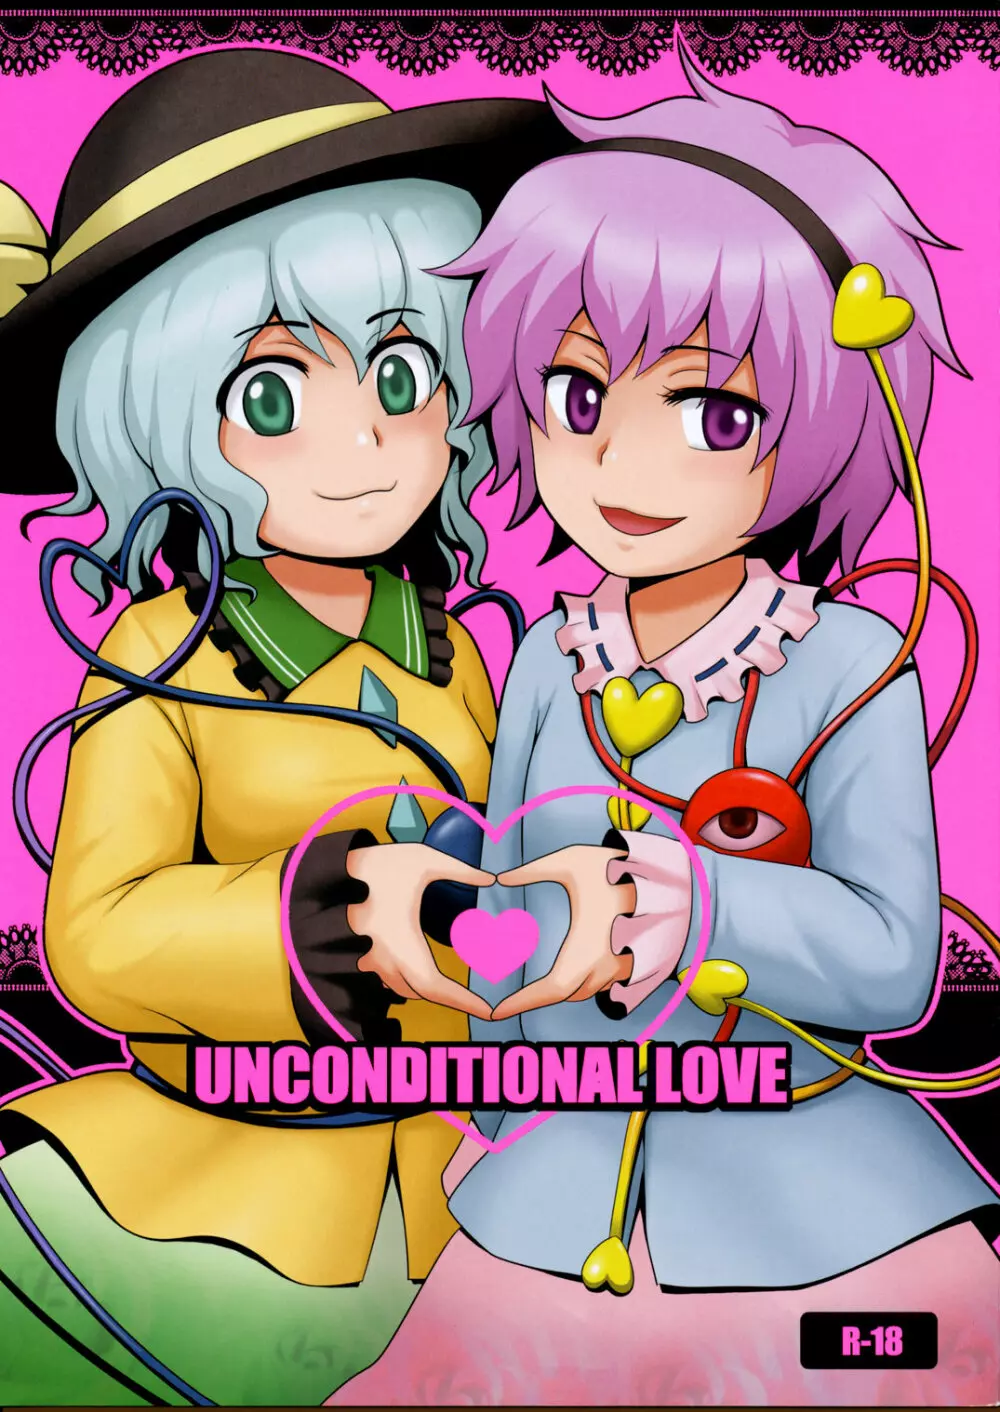 UNCONDITIONAL LOVE - page1